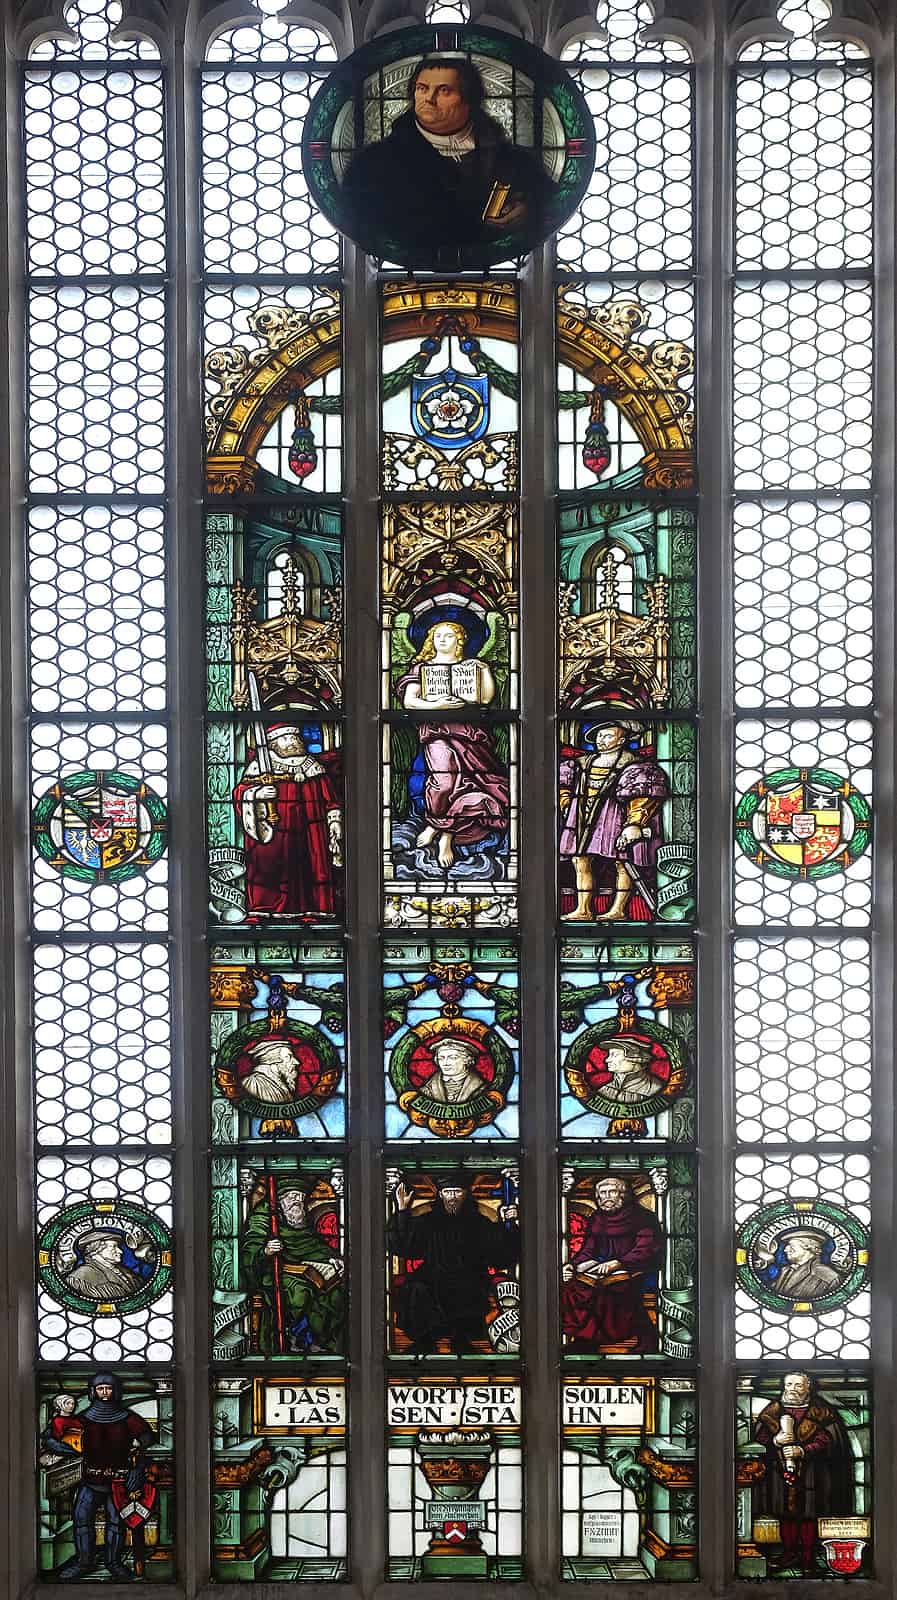 ROTHENBURG, GERMANY -  Stained glass window in the St James Church in Rothenburg ob der Tauber, Germany